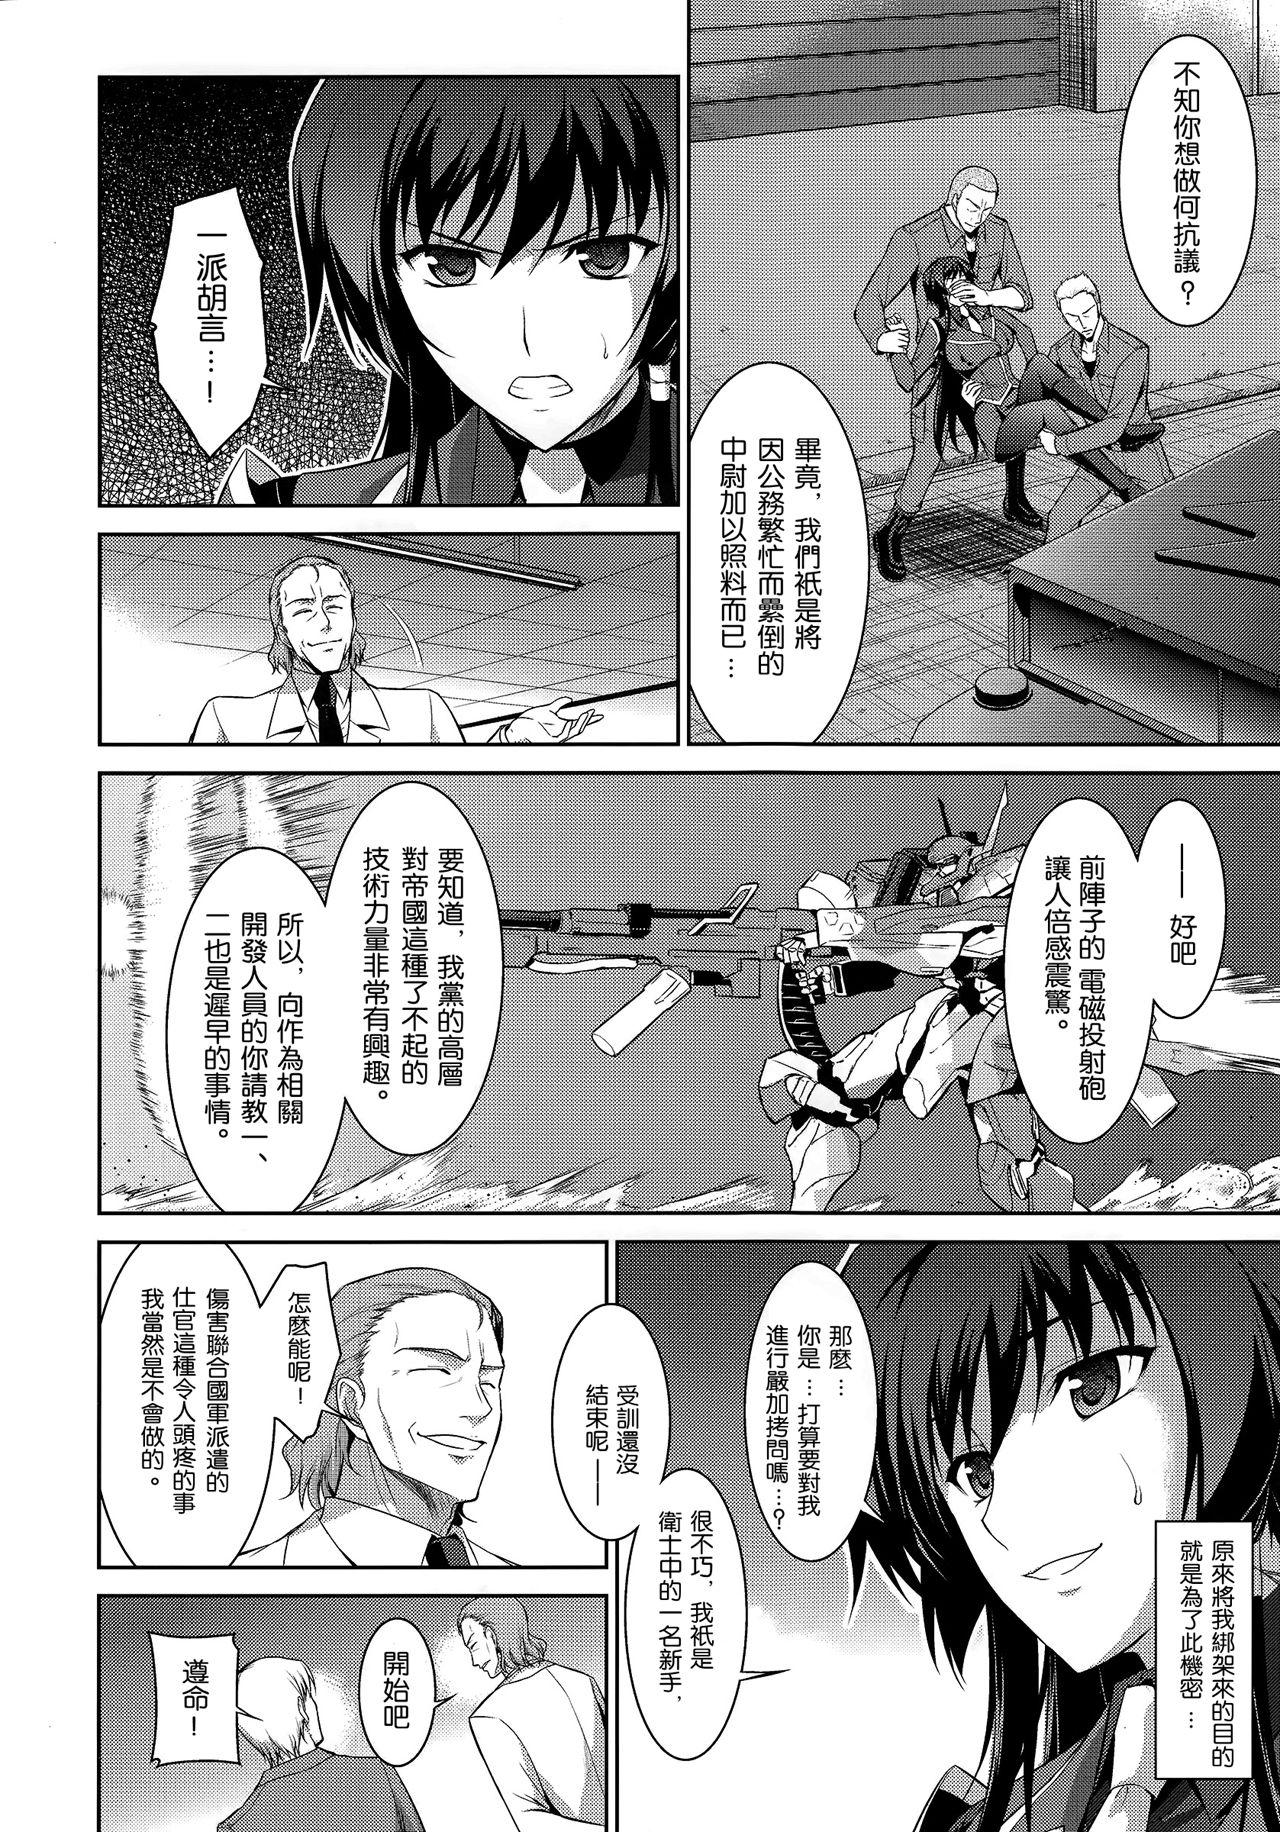 Wet Cunts Ouka Chiru! - Muv-luv alternative total eclipse Big Ass - Page 6